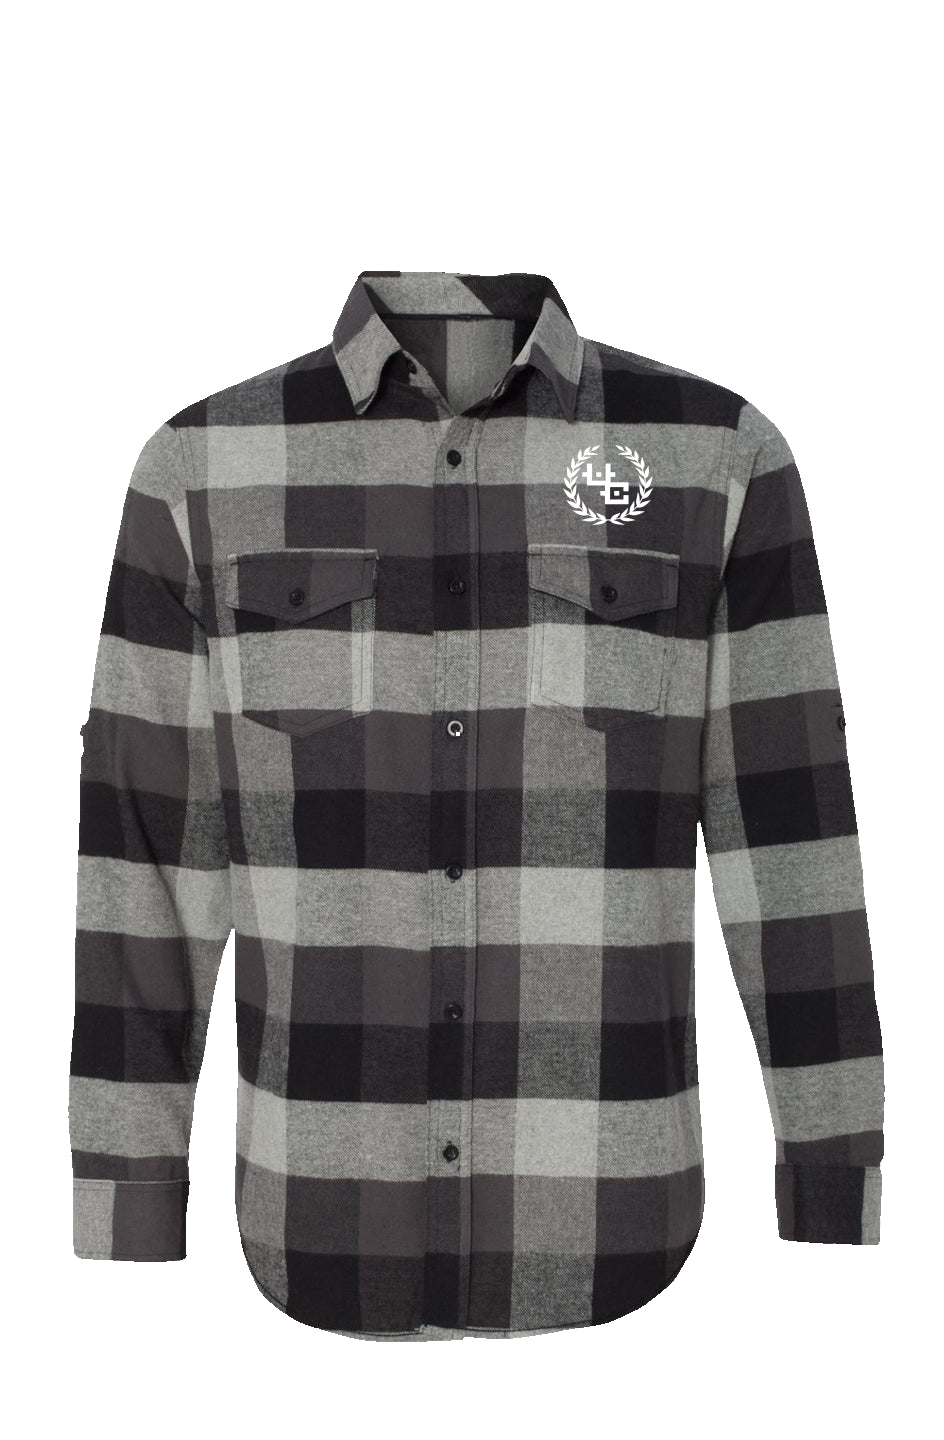 "UC Reef" Long Sleeve Flannel Grey And Black